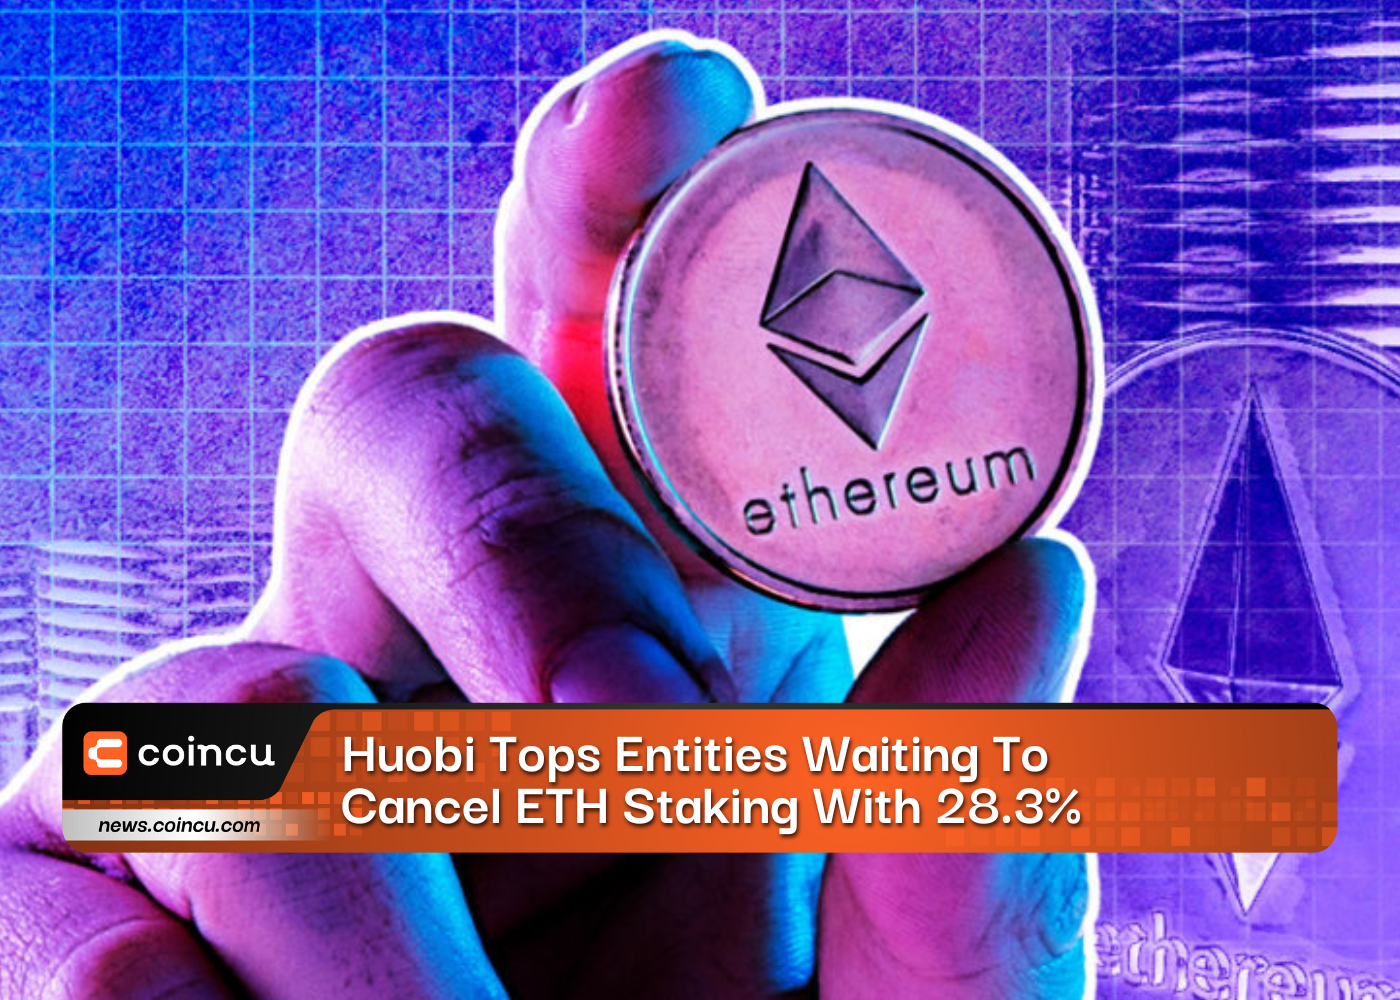 Huobi Tops Entities Waiting To Cancel ETH Staking With 28.3%